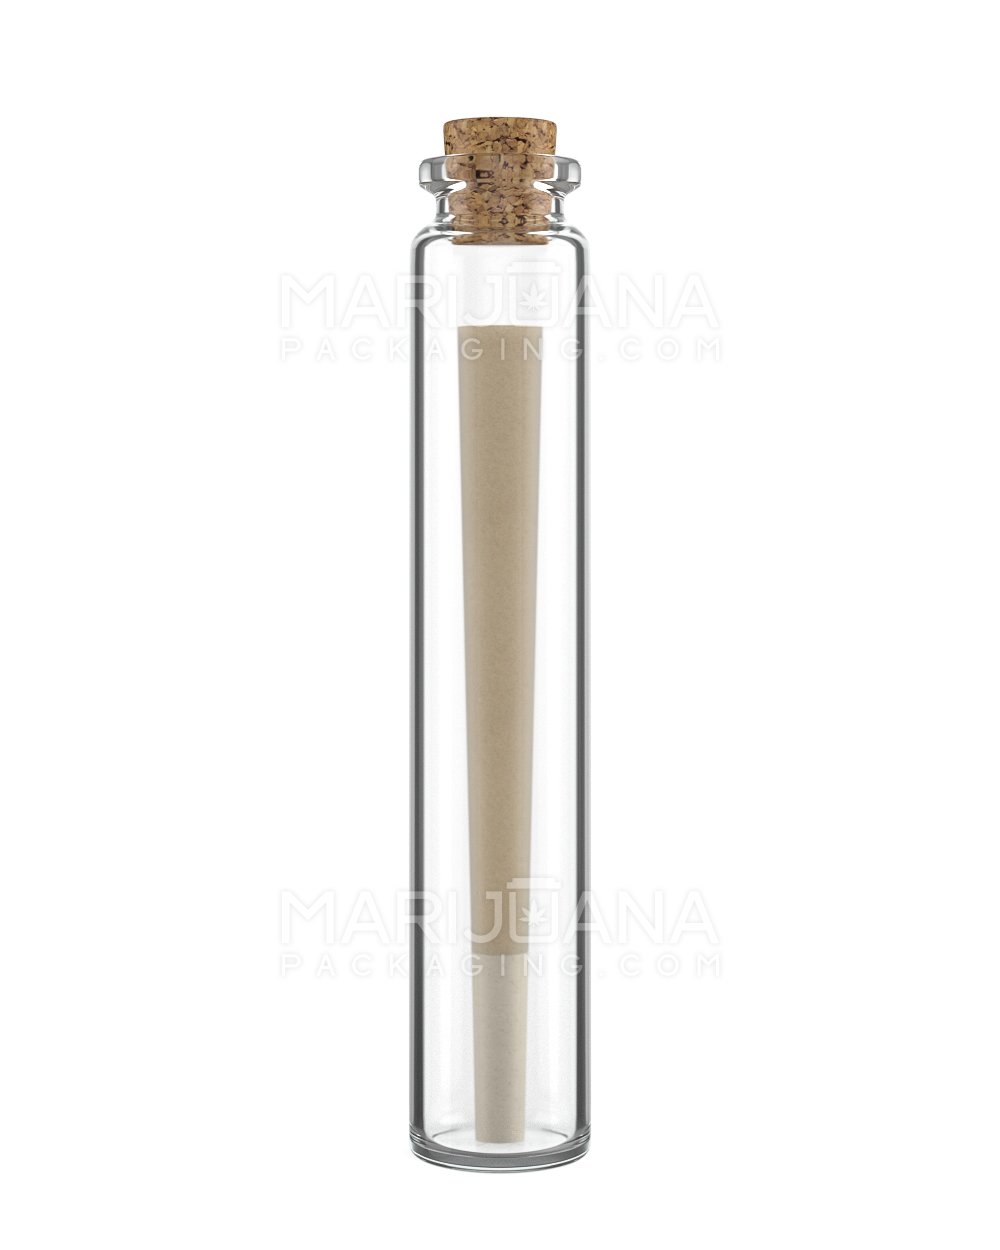 Glass Pre-Roll Tube with Cork Top | 120mm - Clear Glass - 586 Count - 2